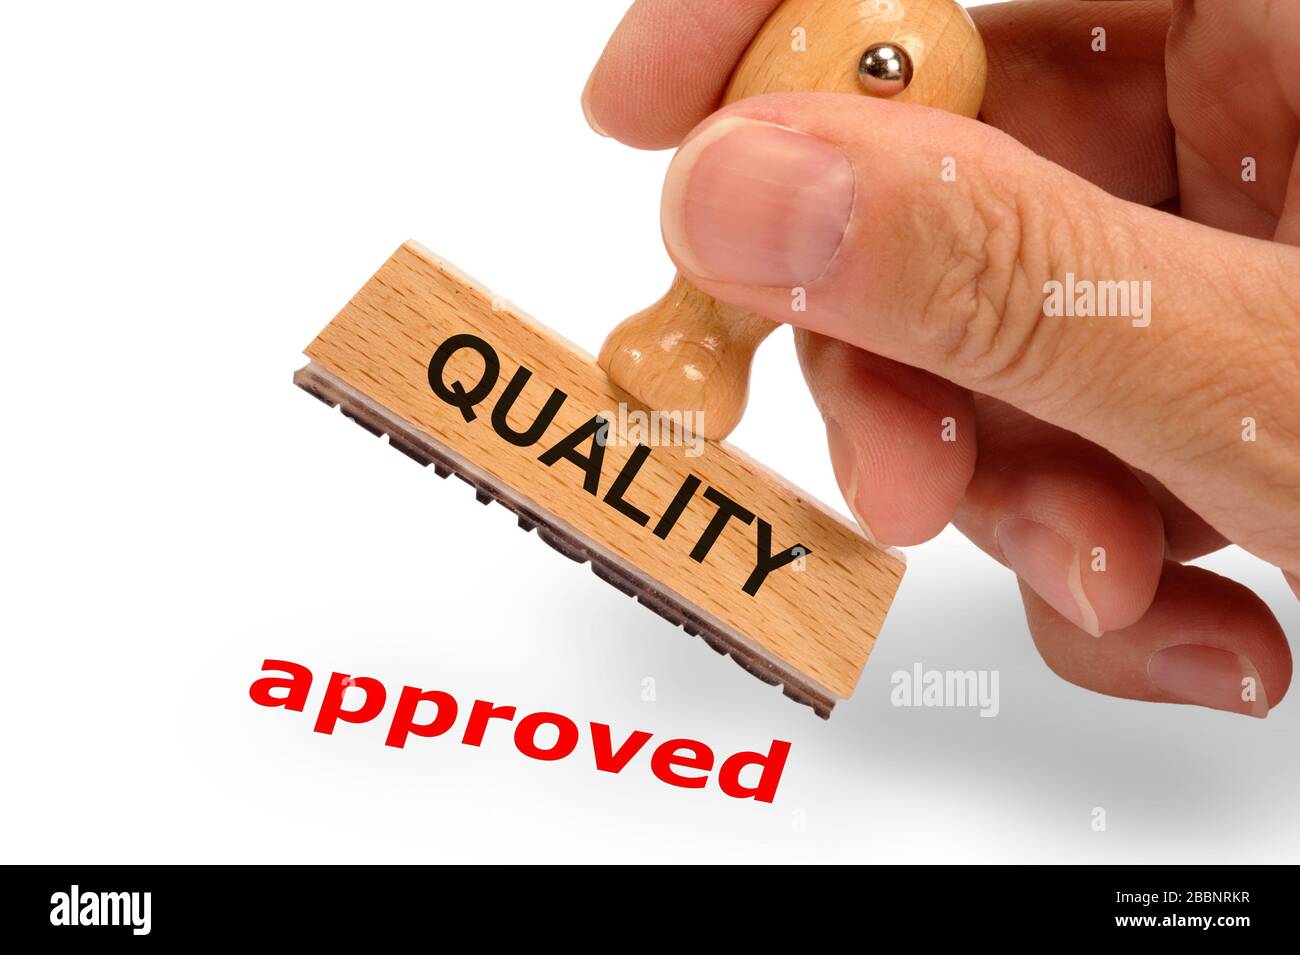 approved printed on rubber stamp in hand Stock Photo